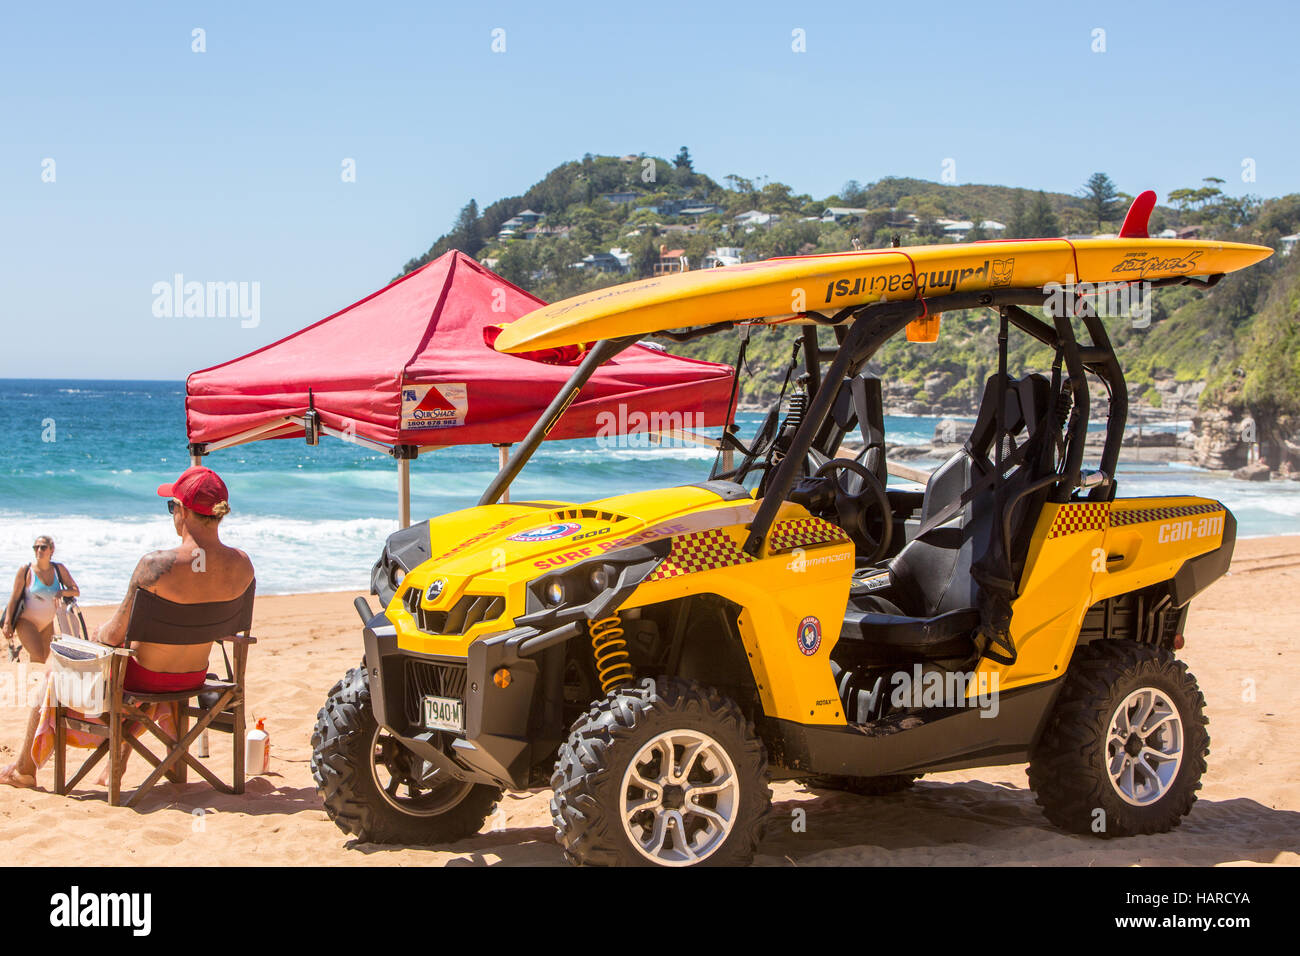 Surf rescue lifeguard seated on Whale Beach Sydney watching for those needing help in the ocean,Australia Stock Photo